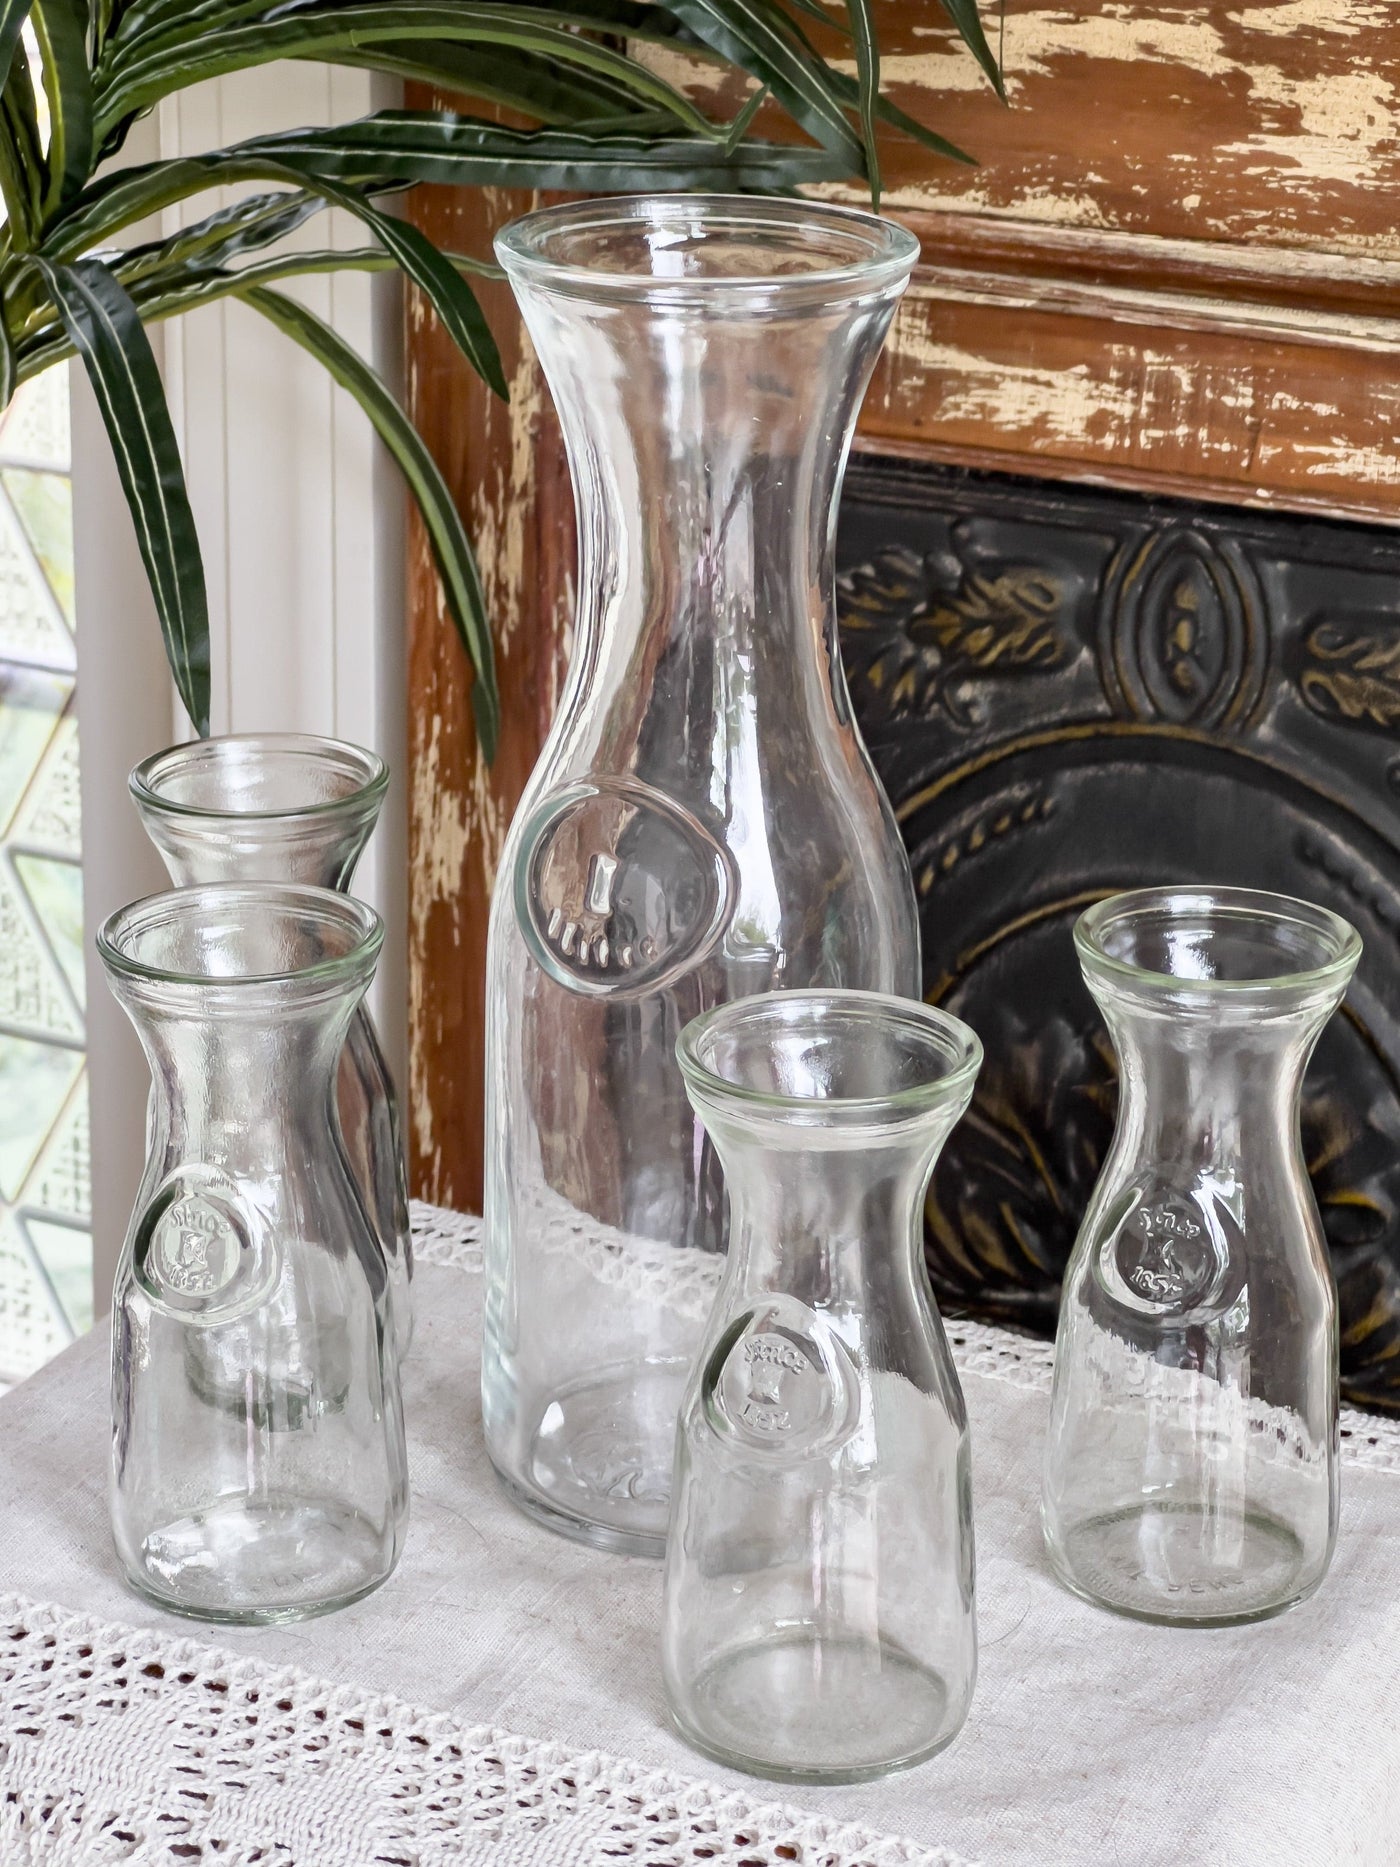 GLASS JUG SET Revive In Style Vintage Furniture Painted Refinished Redesign Beautiful One of a Kind Artistic Antique Unique Home Decor Interior Design French Country Shabby Chic Cottage Farmhouse Grandmillenial Coastal Chalk Paint Metallic Glam Eclectic Quality Dovetailed Rustic Furniture Painter Pinterest Bedroom Living Room Entryway Kitchen Home Trends House Styles Decorating ideas